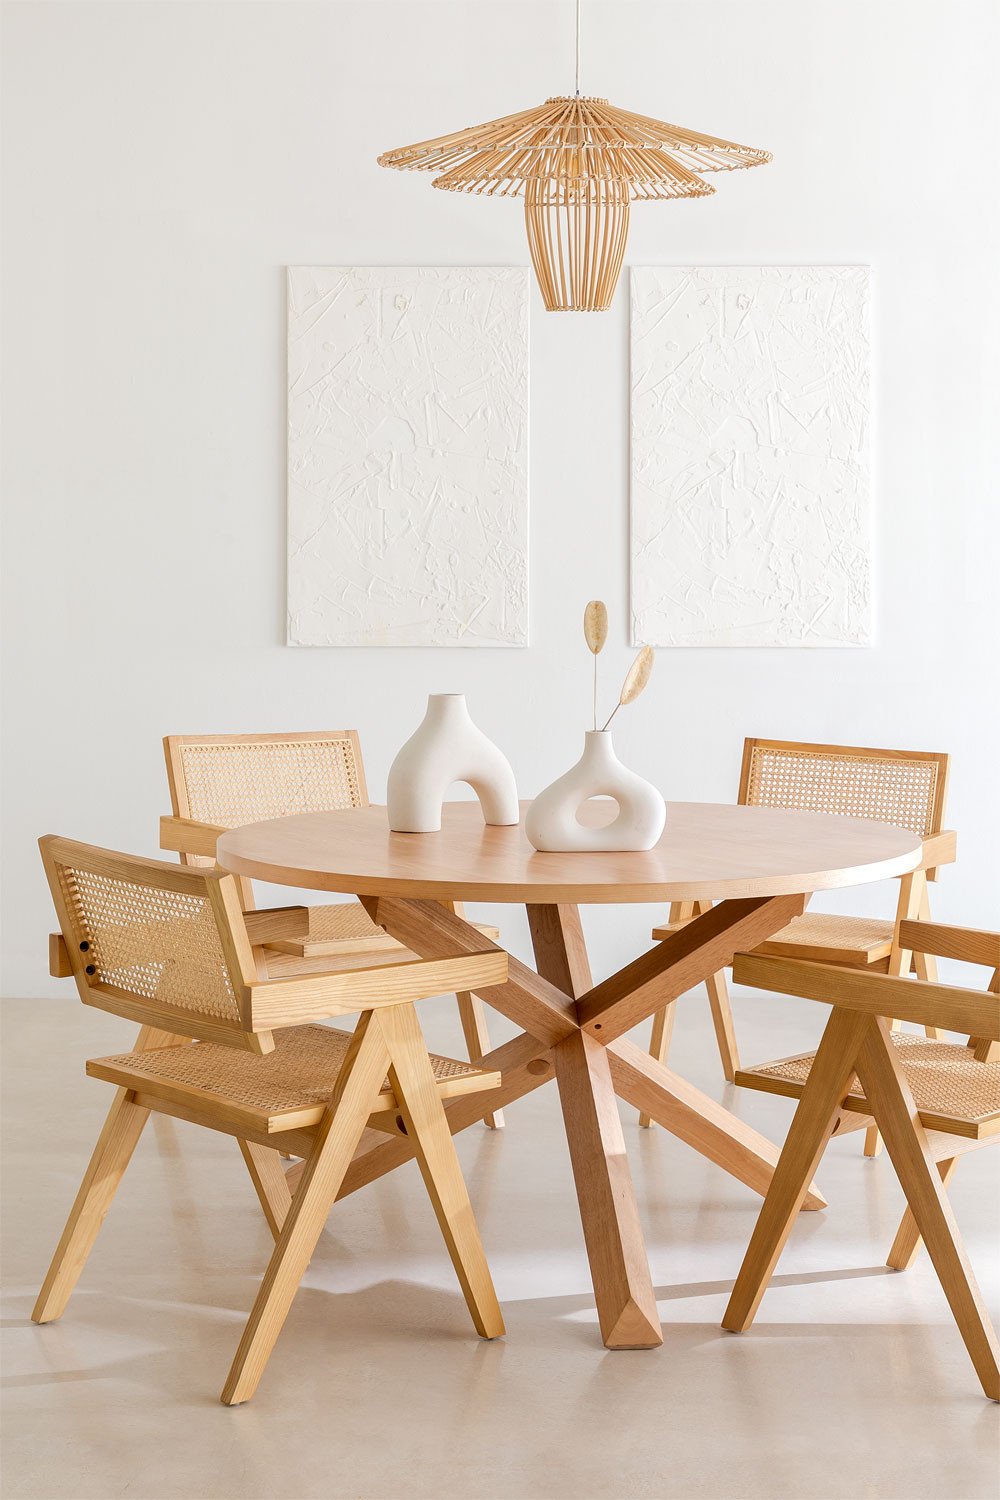 Mieren Round Dining Table Set (Ø120 cm) and 4 Chairs with Armrests in Ash Wood and Rattan Lali Style, gallery image 1